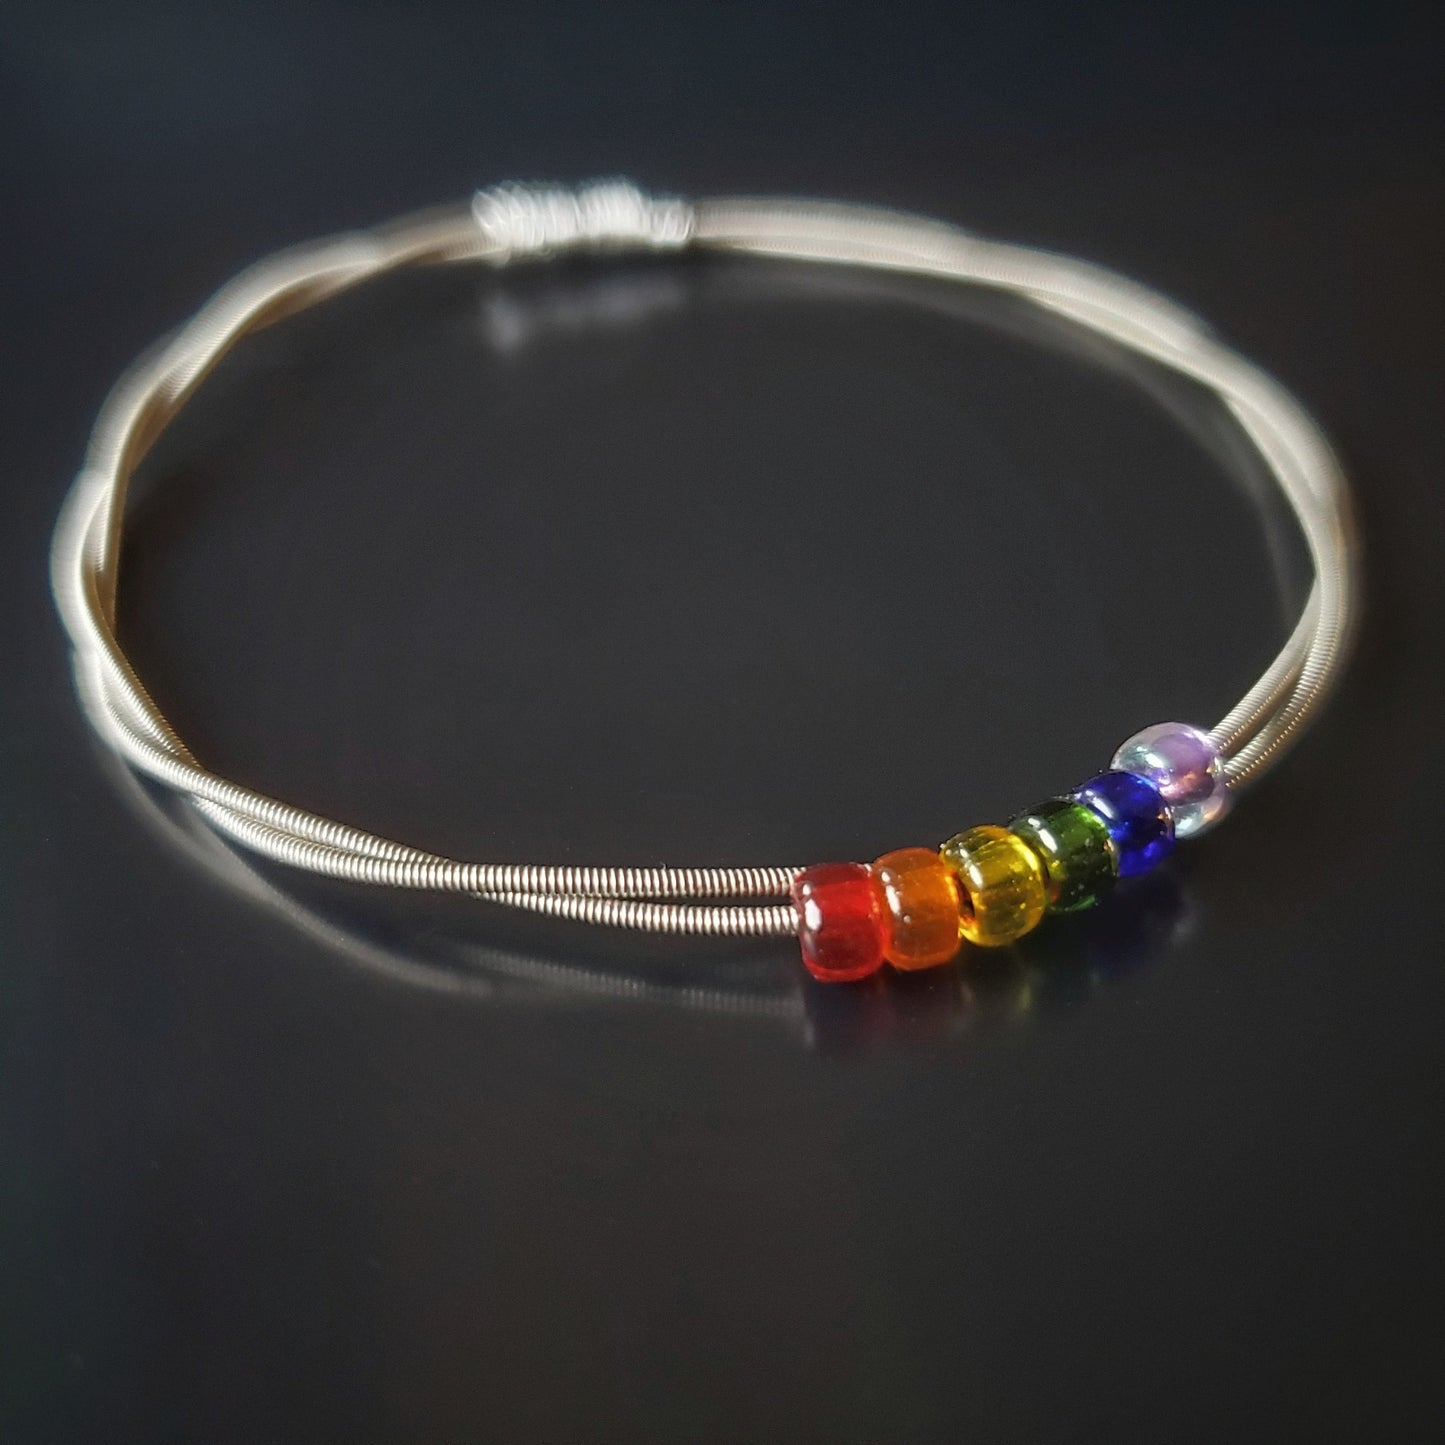 bangle style bracelet made from an upcycled guitar string - 6 glass beads represent the colours of the LGBTQ flag (red, orange, yellow, green, blue and purple)